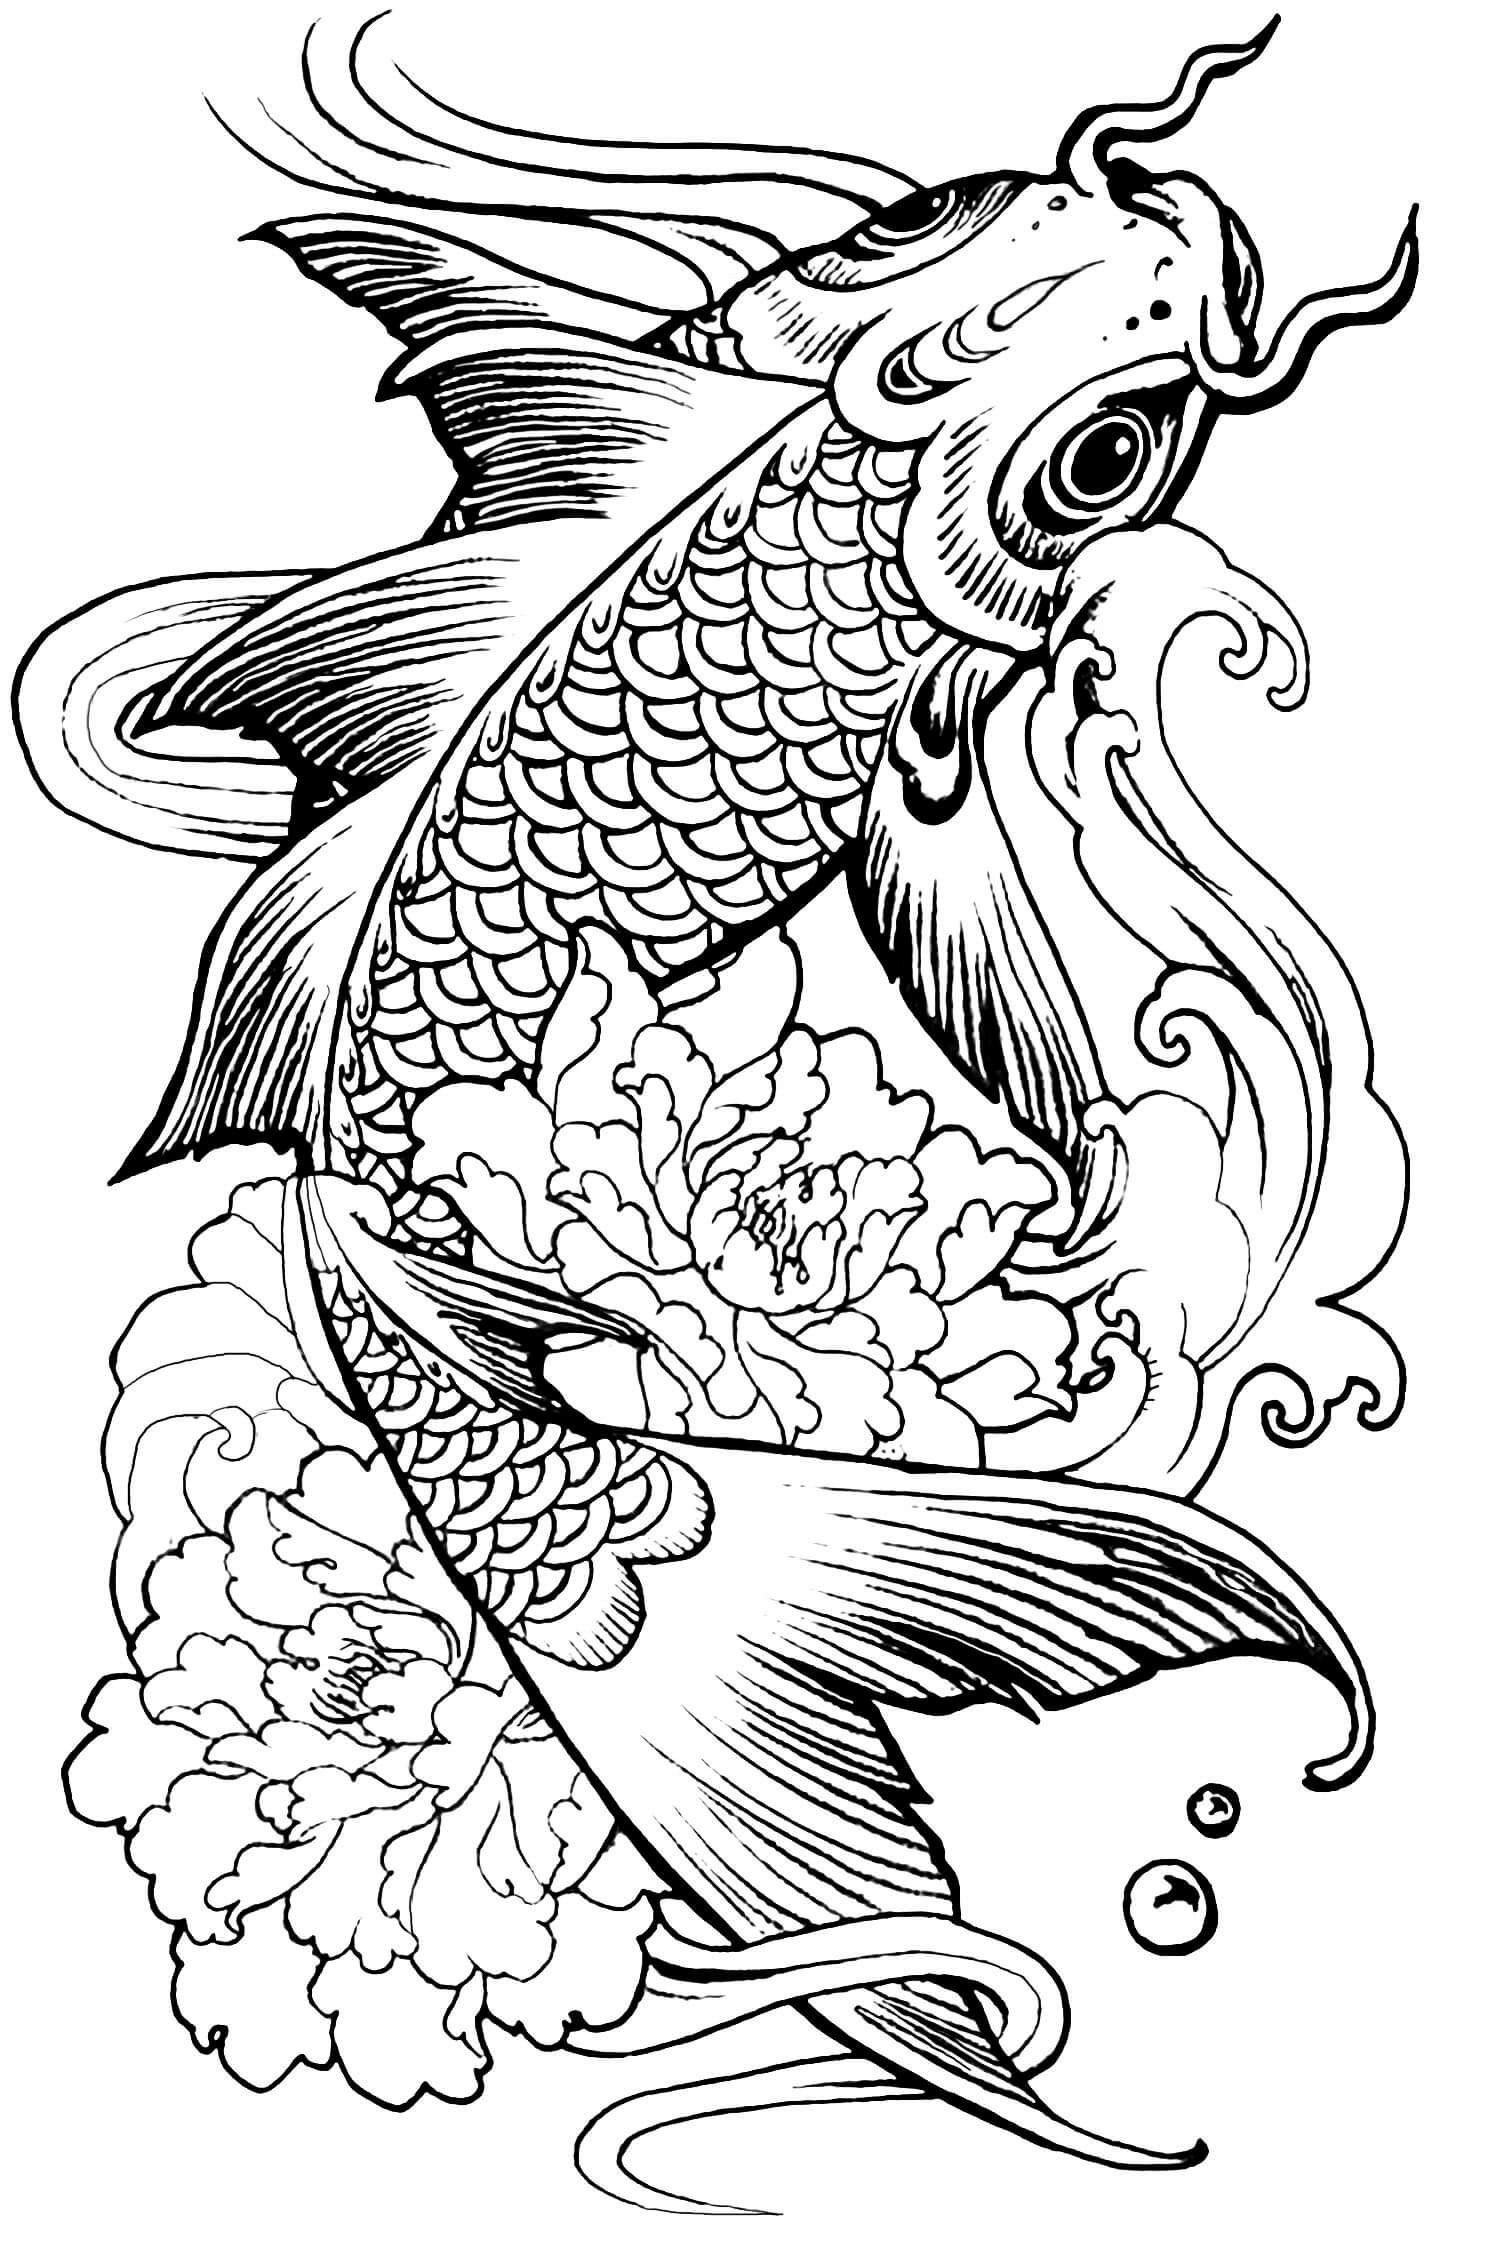 Coloring Pages For Adults Animals
 Coloring Pages For Adults Difficult Animals 35